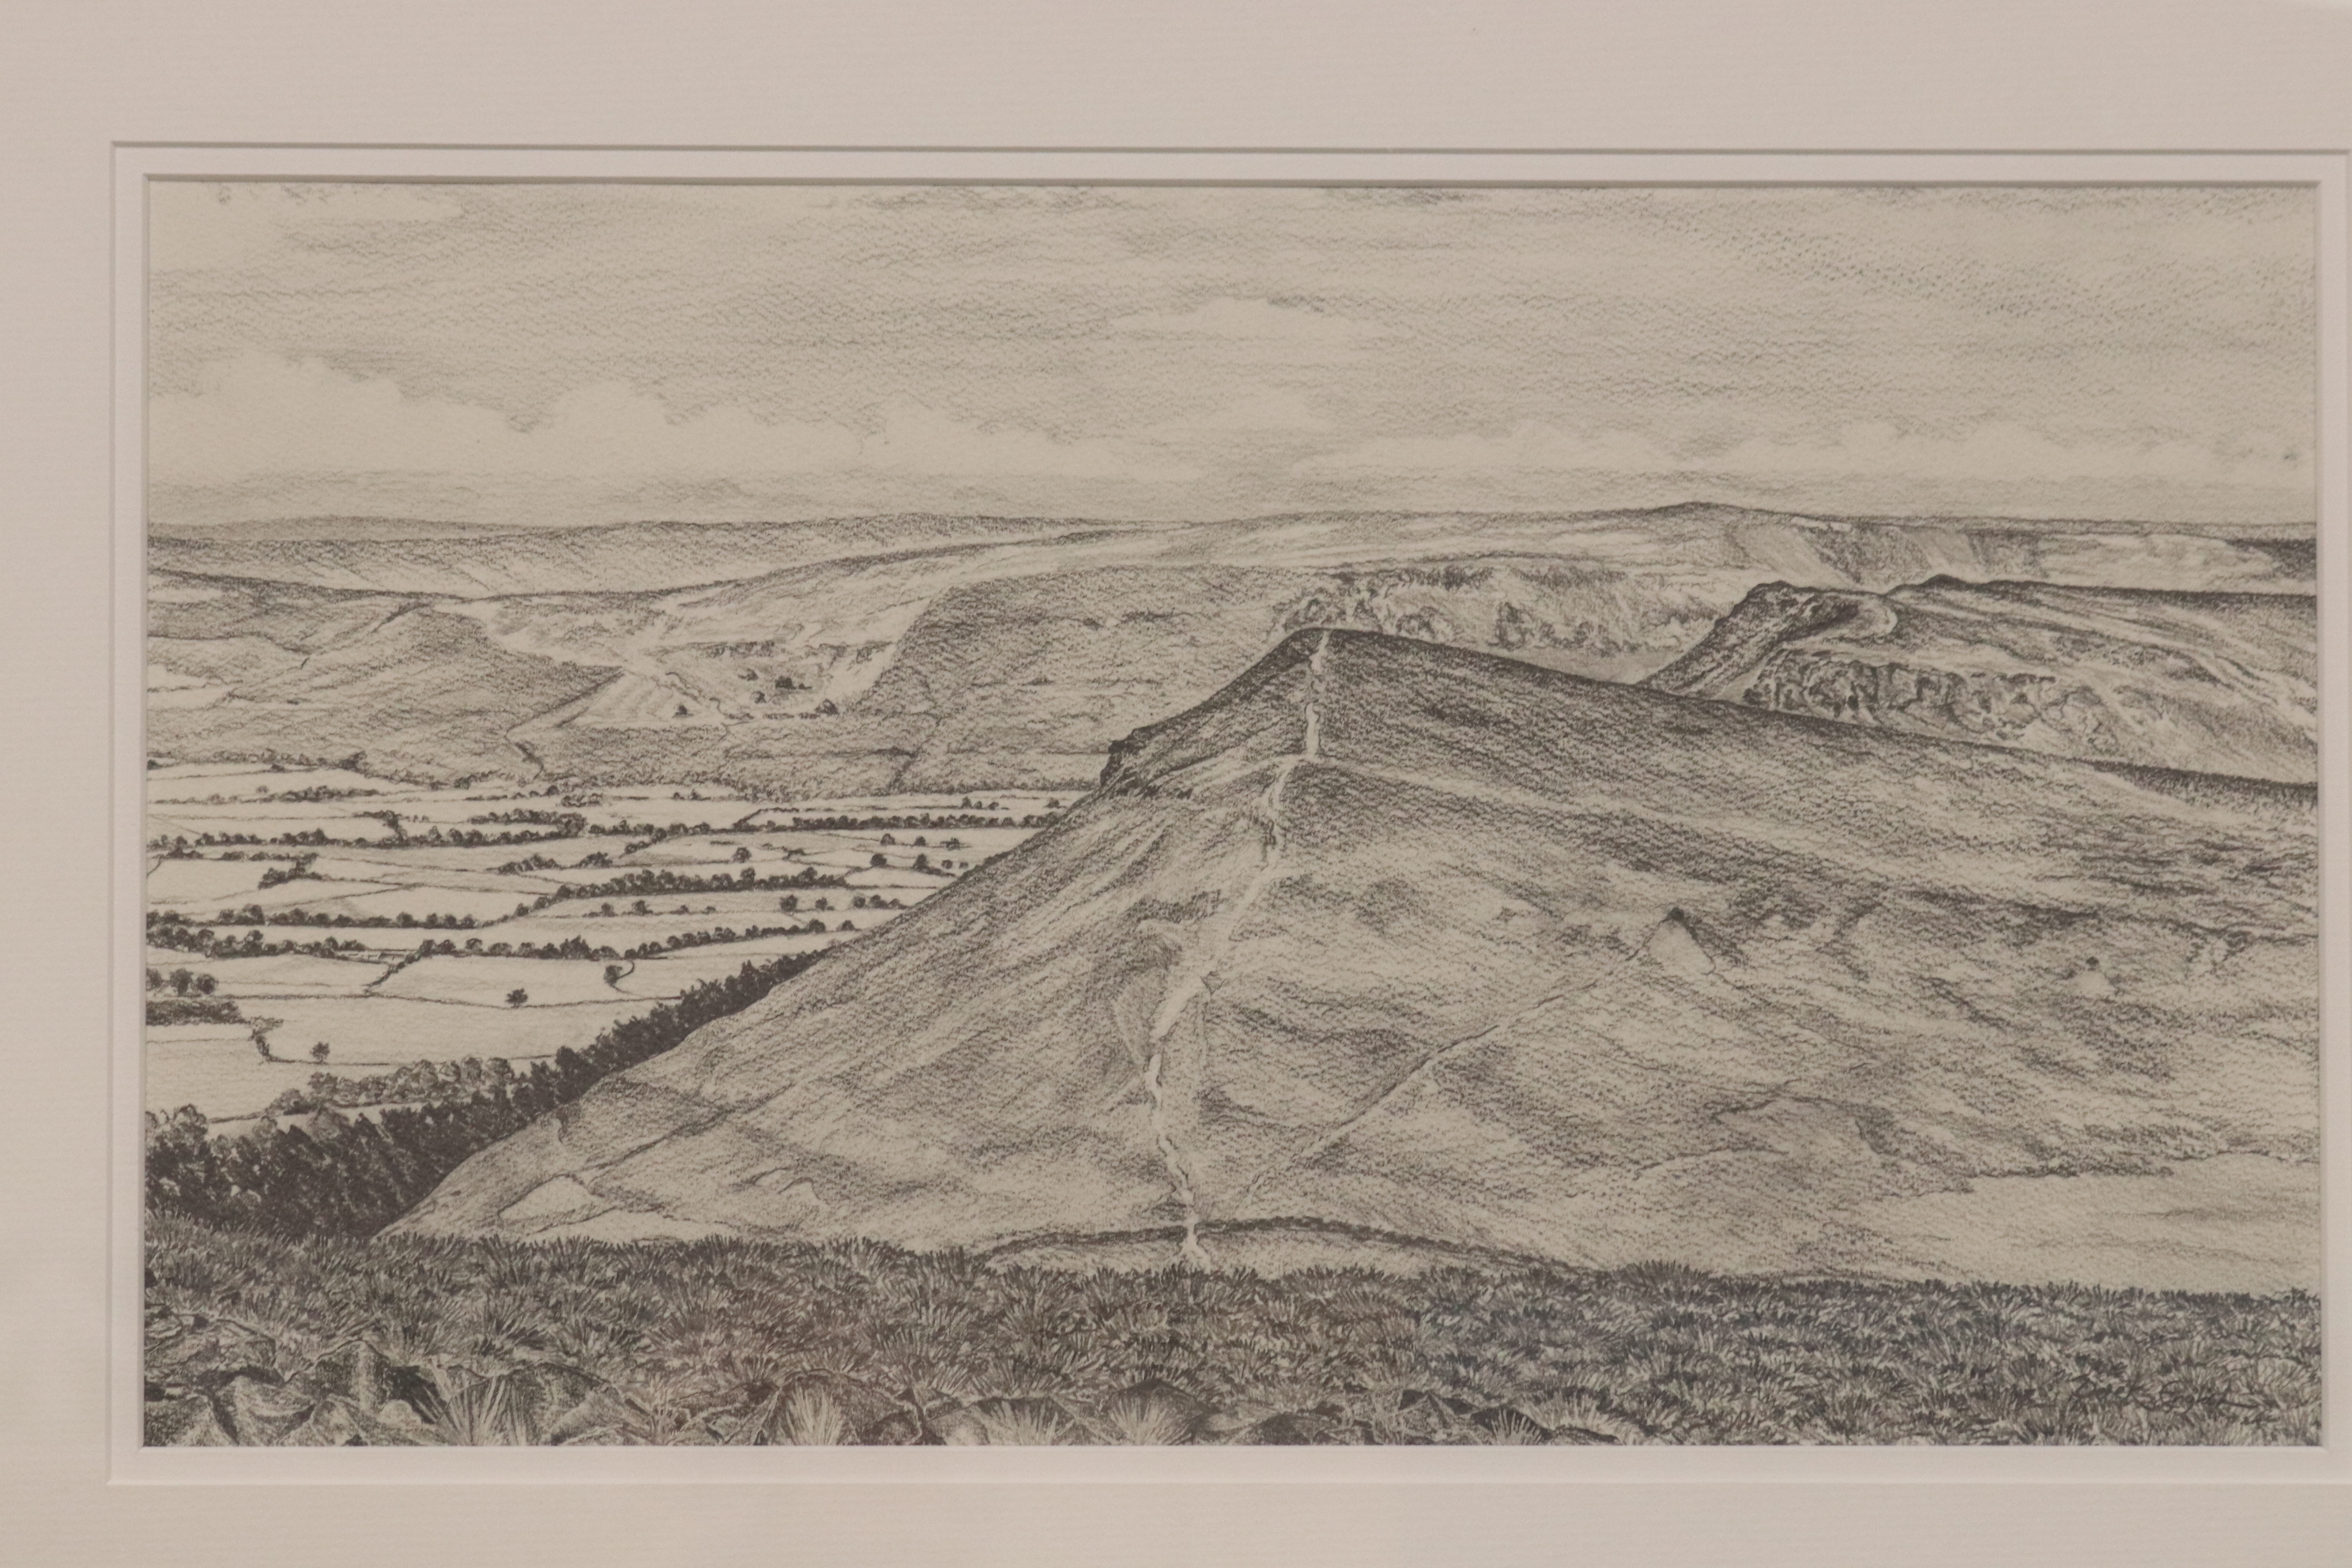 Derek English, pencil, signed, 'Ullswater', 'Cleveland Hills', 'Cleveland Way' (Cringle Moor), 'View - Image 3 of 4